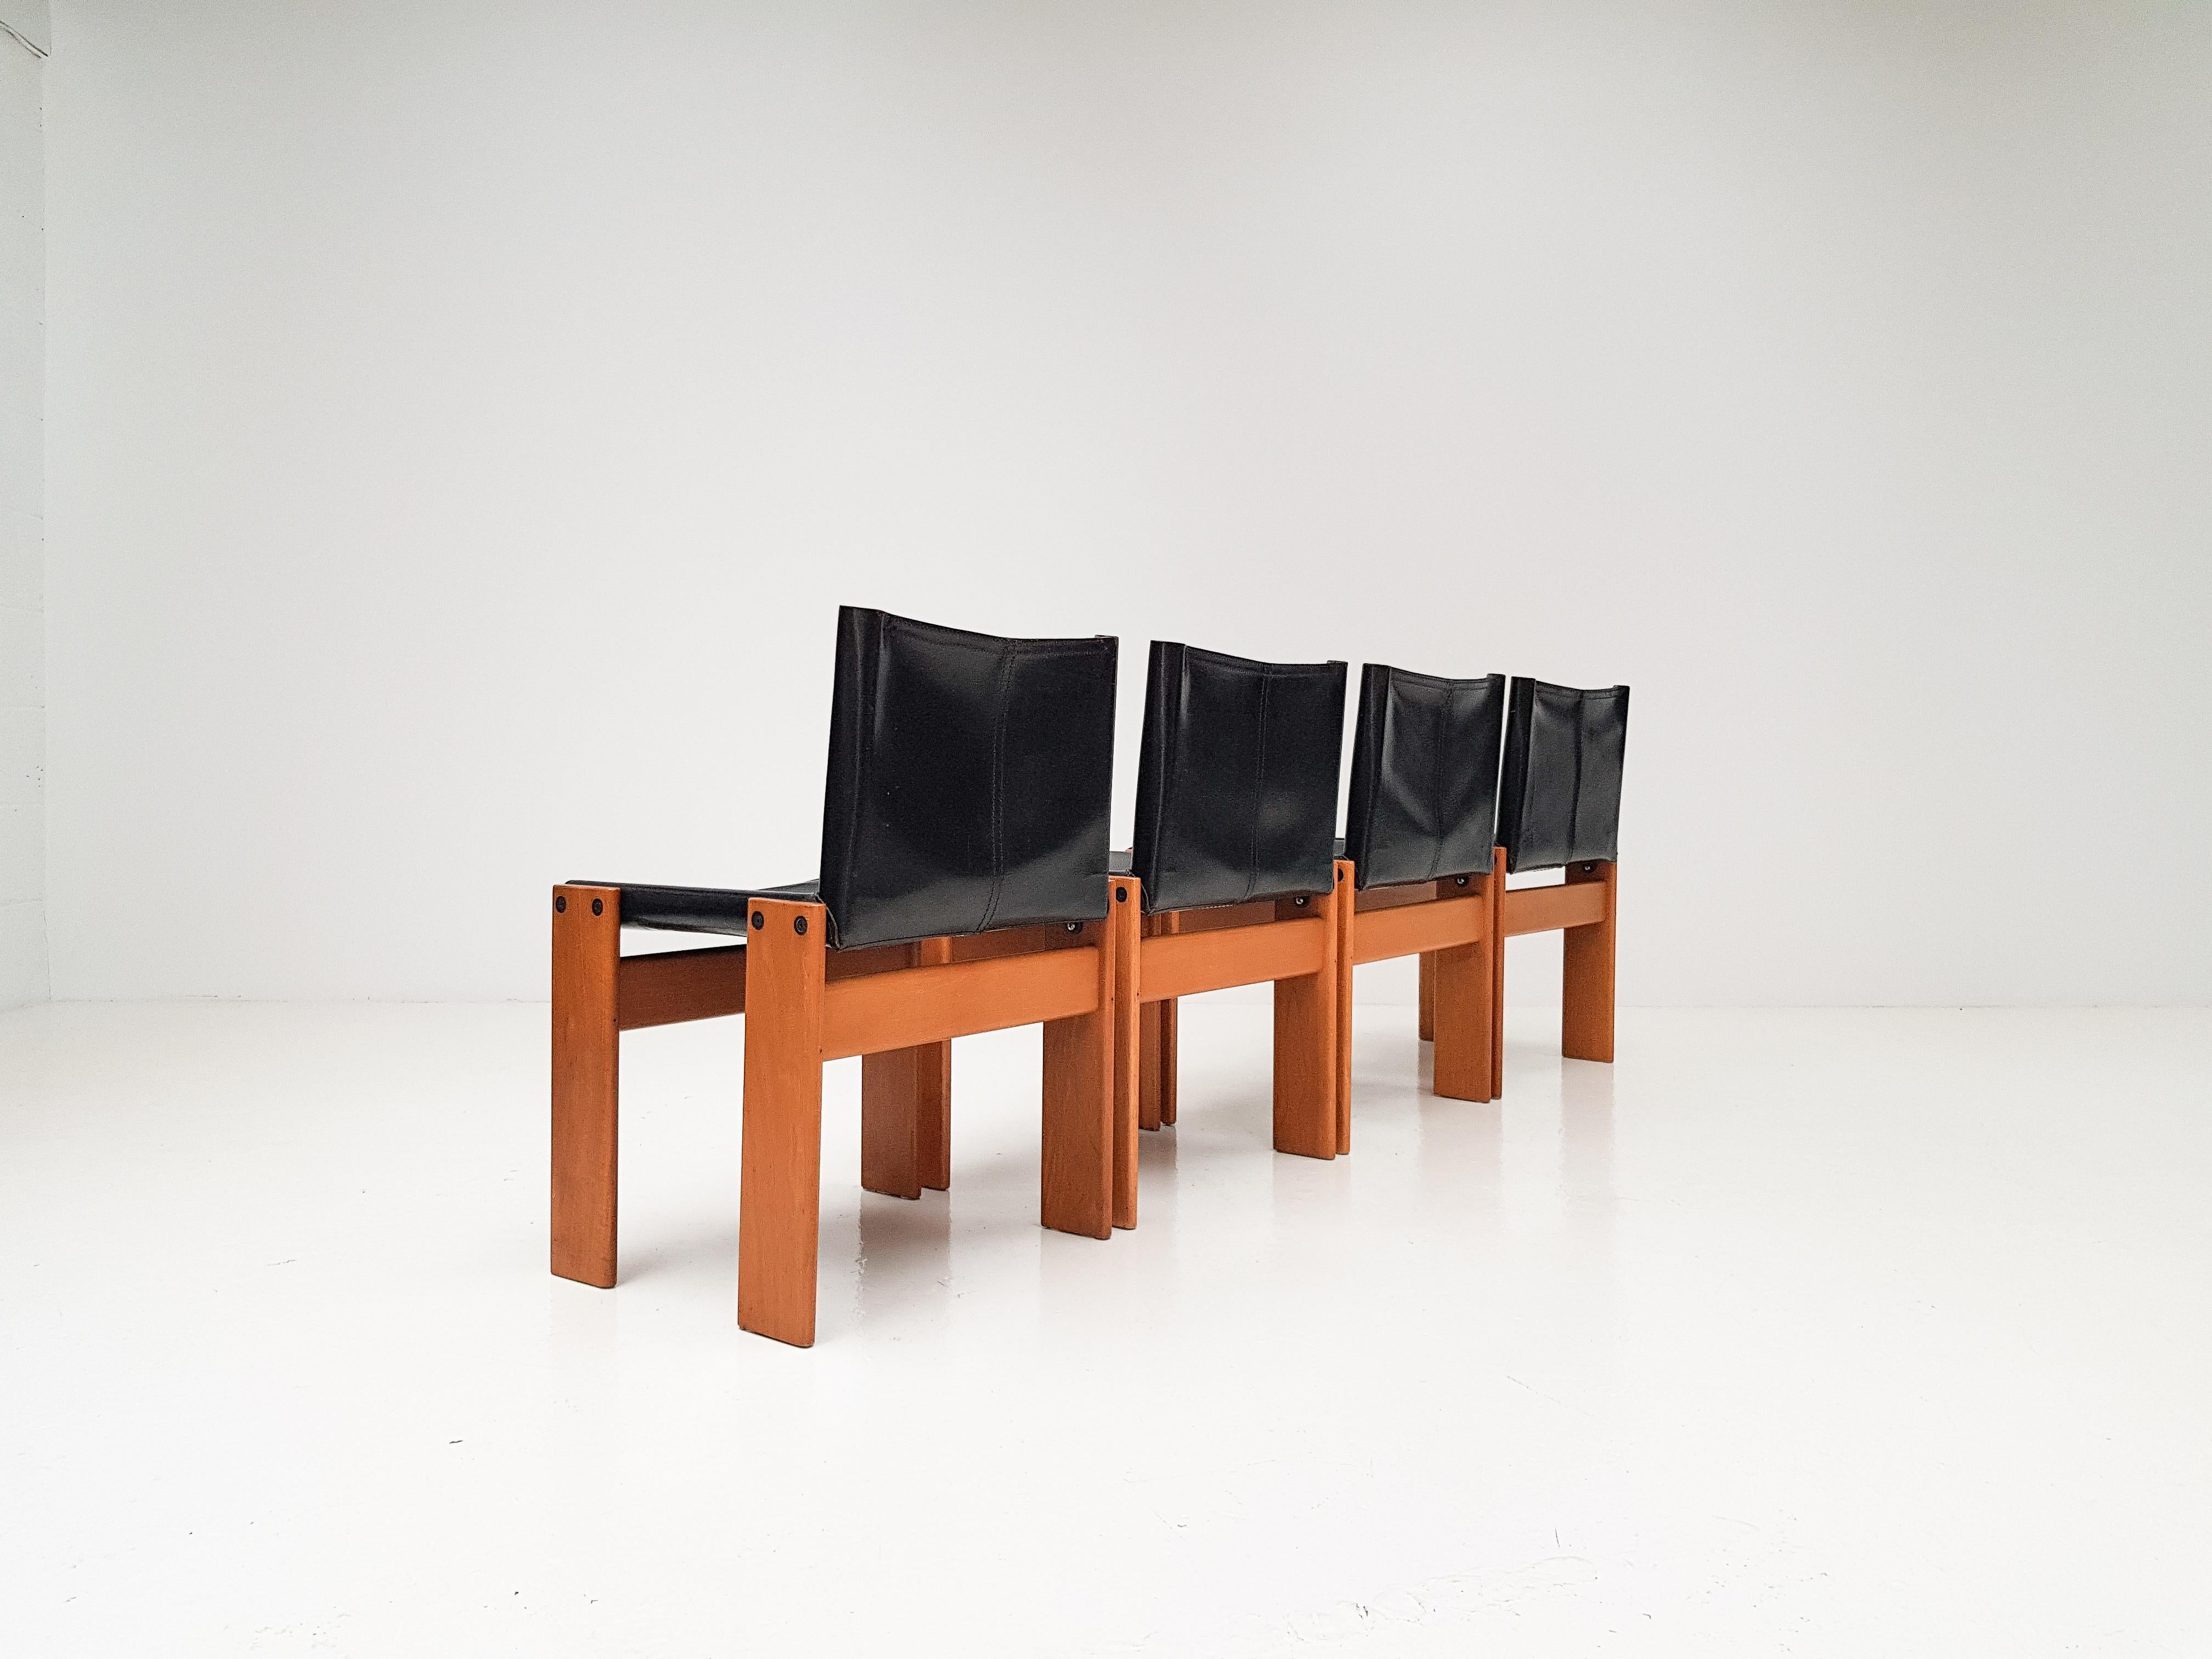 Set of 4 'Monk' Dining Chairs by Afra & Tobia Scarpa for Molteni, Italy, 1974 In Good Condition In London Road, Baldock, Hertfordshire